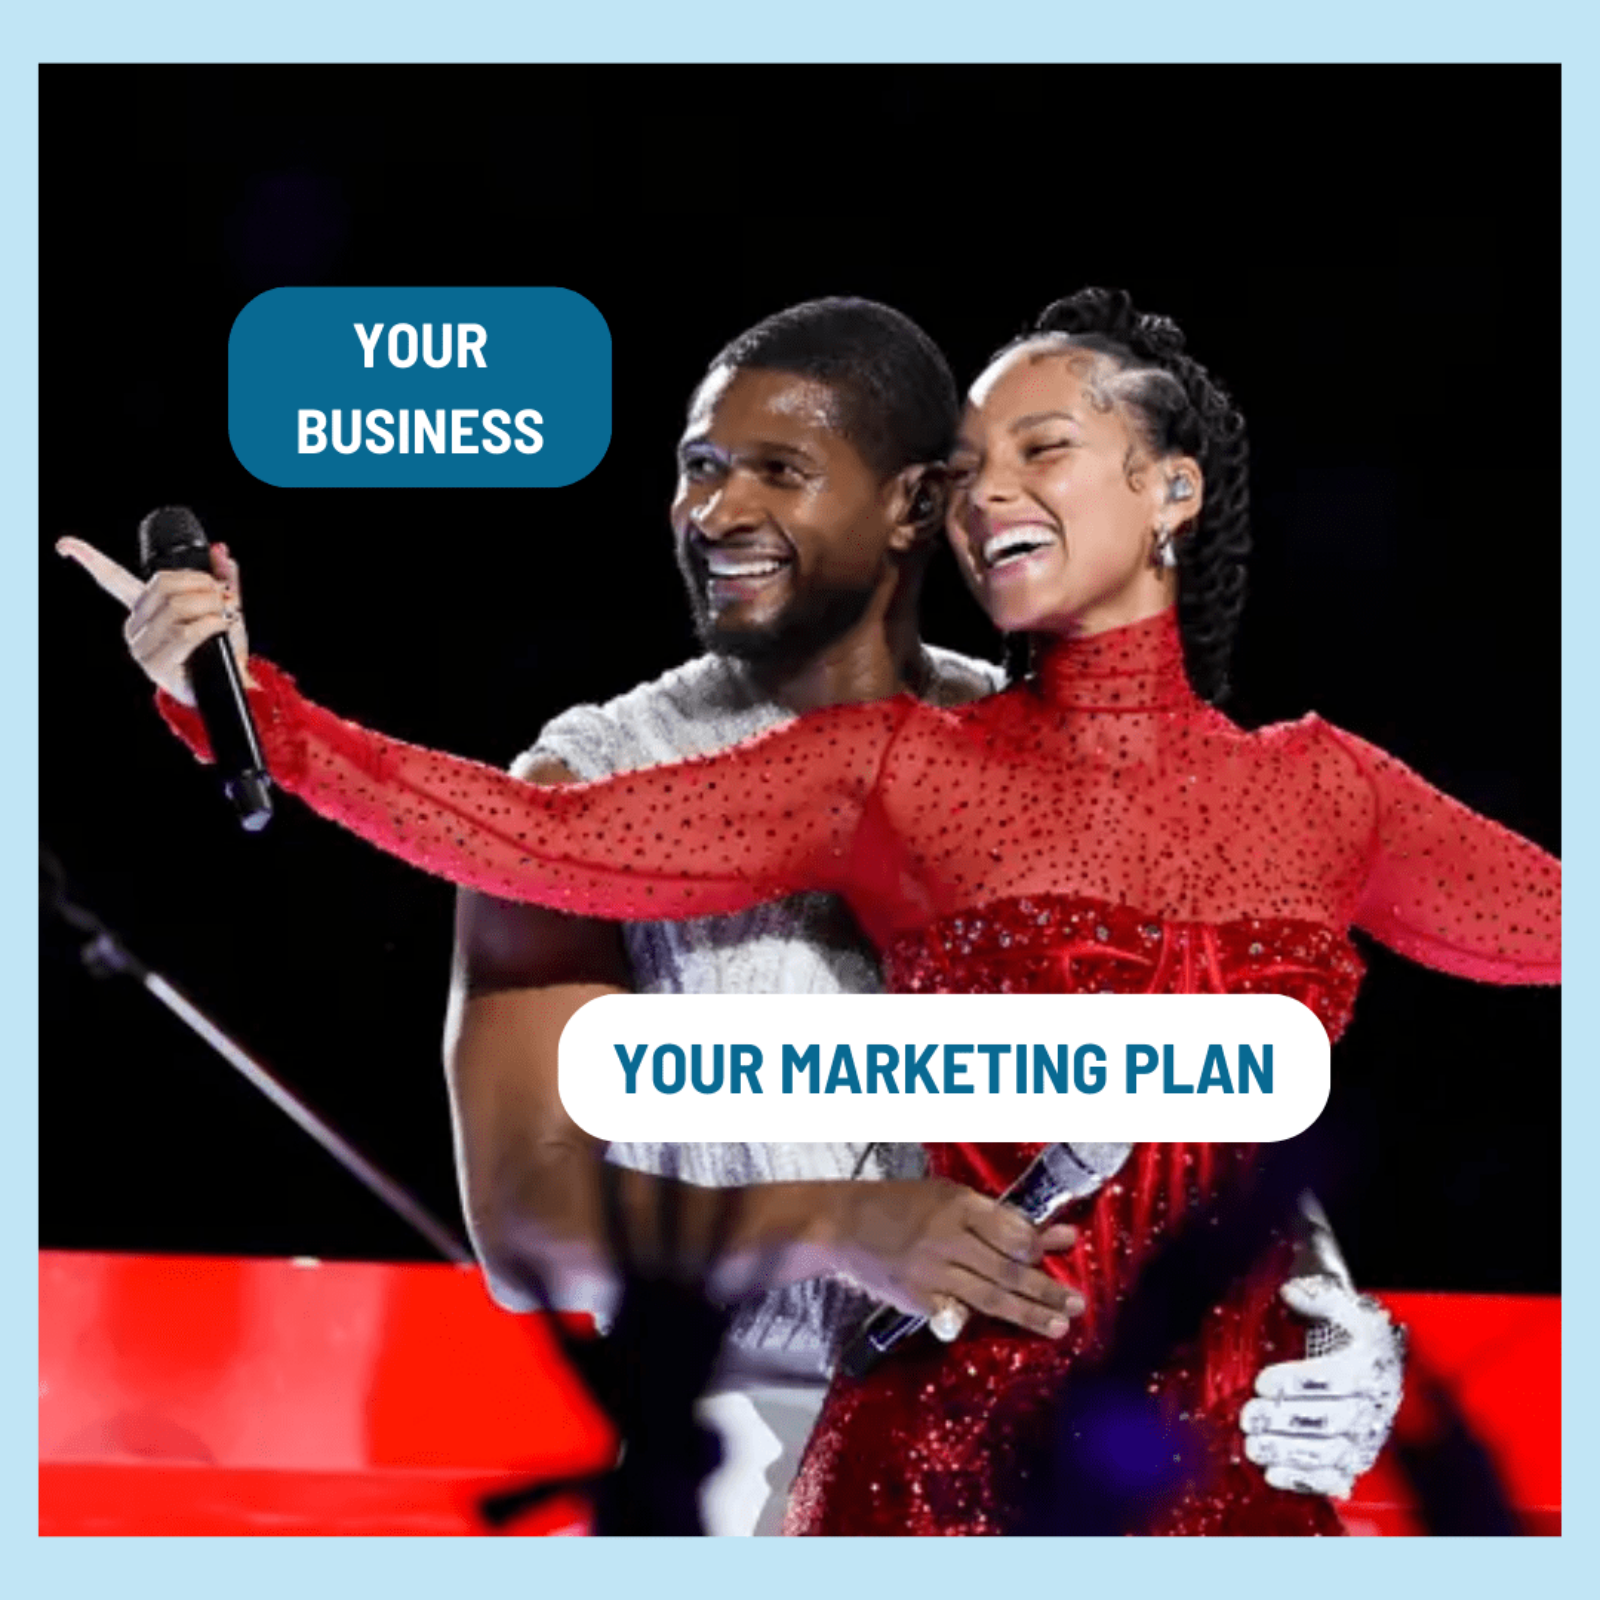 What Should You Do With Your New Marketing Plan? 13 Easy Steps to Take.